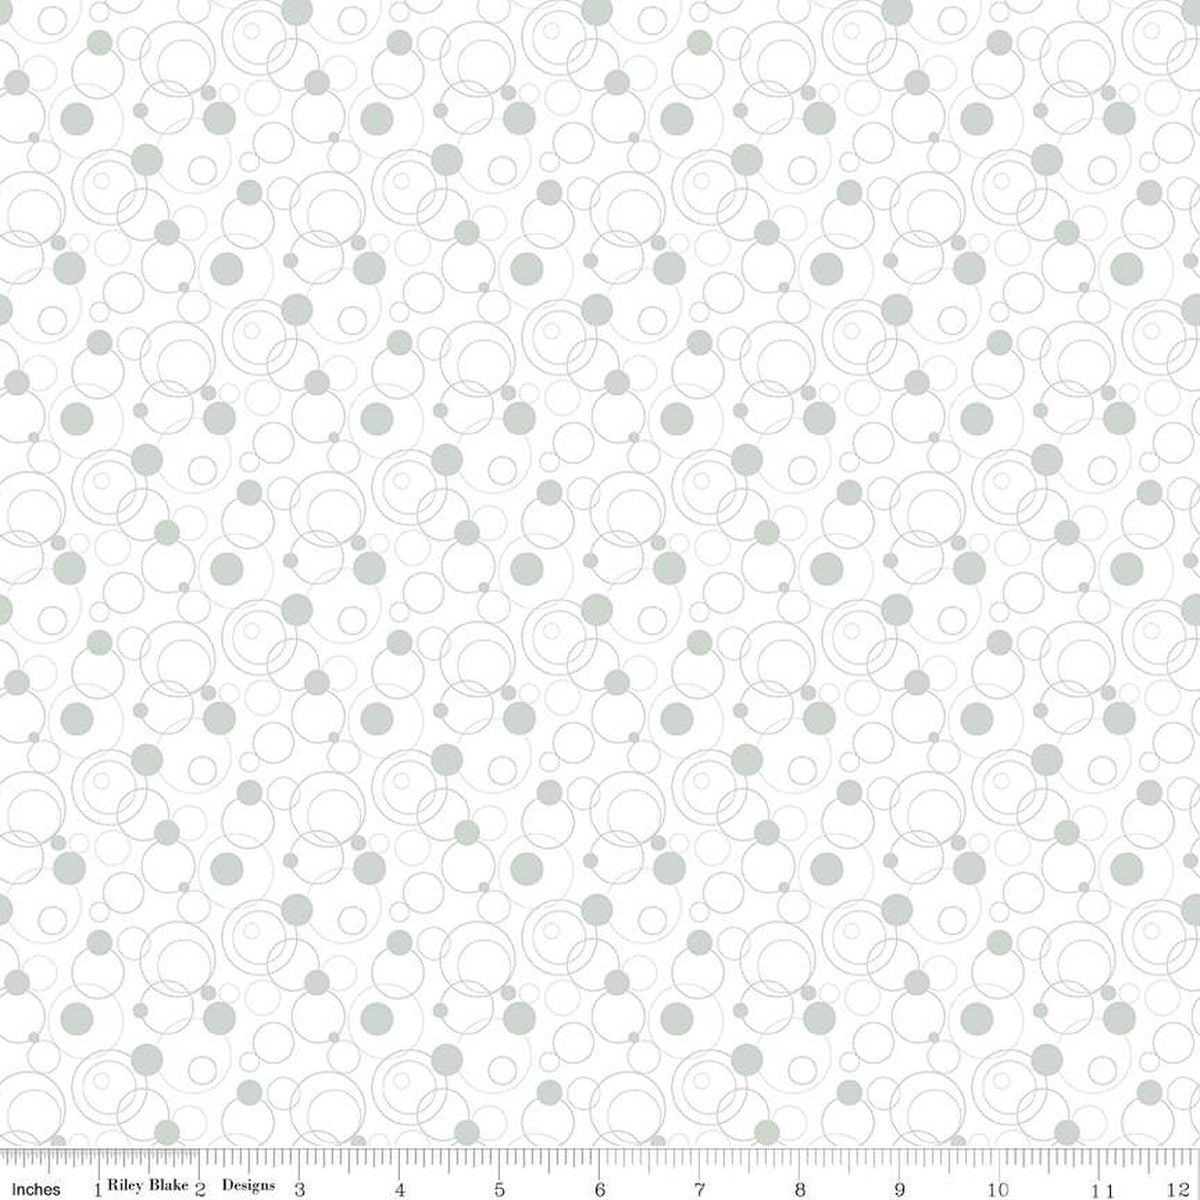 Effervescence Circles Riley Blake Designs light gray circle outlines and dots on white white quilt weight cotton 